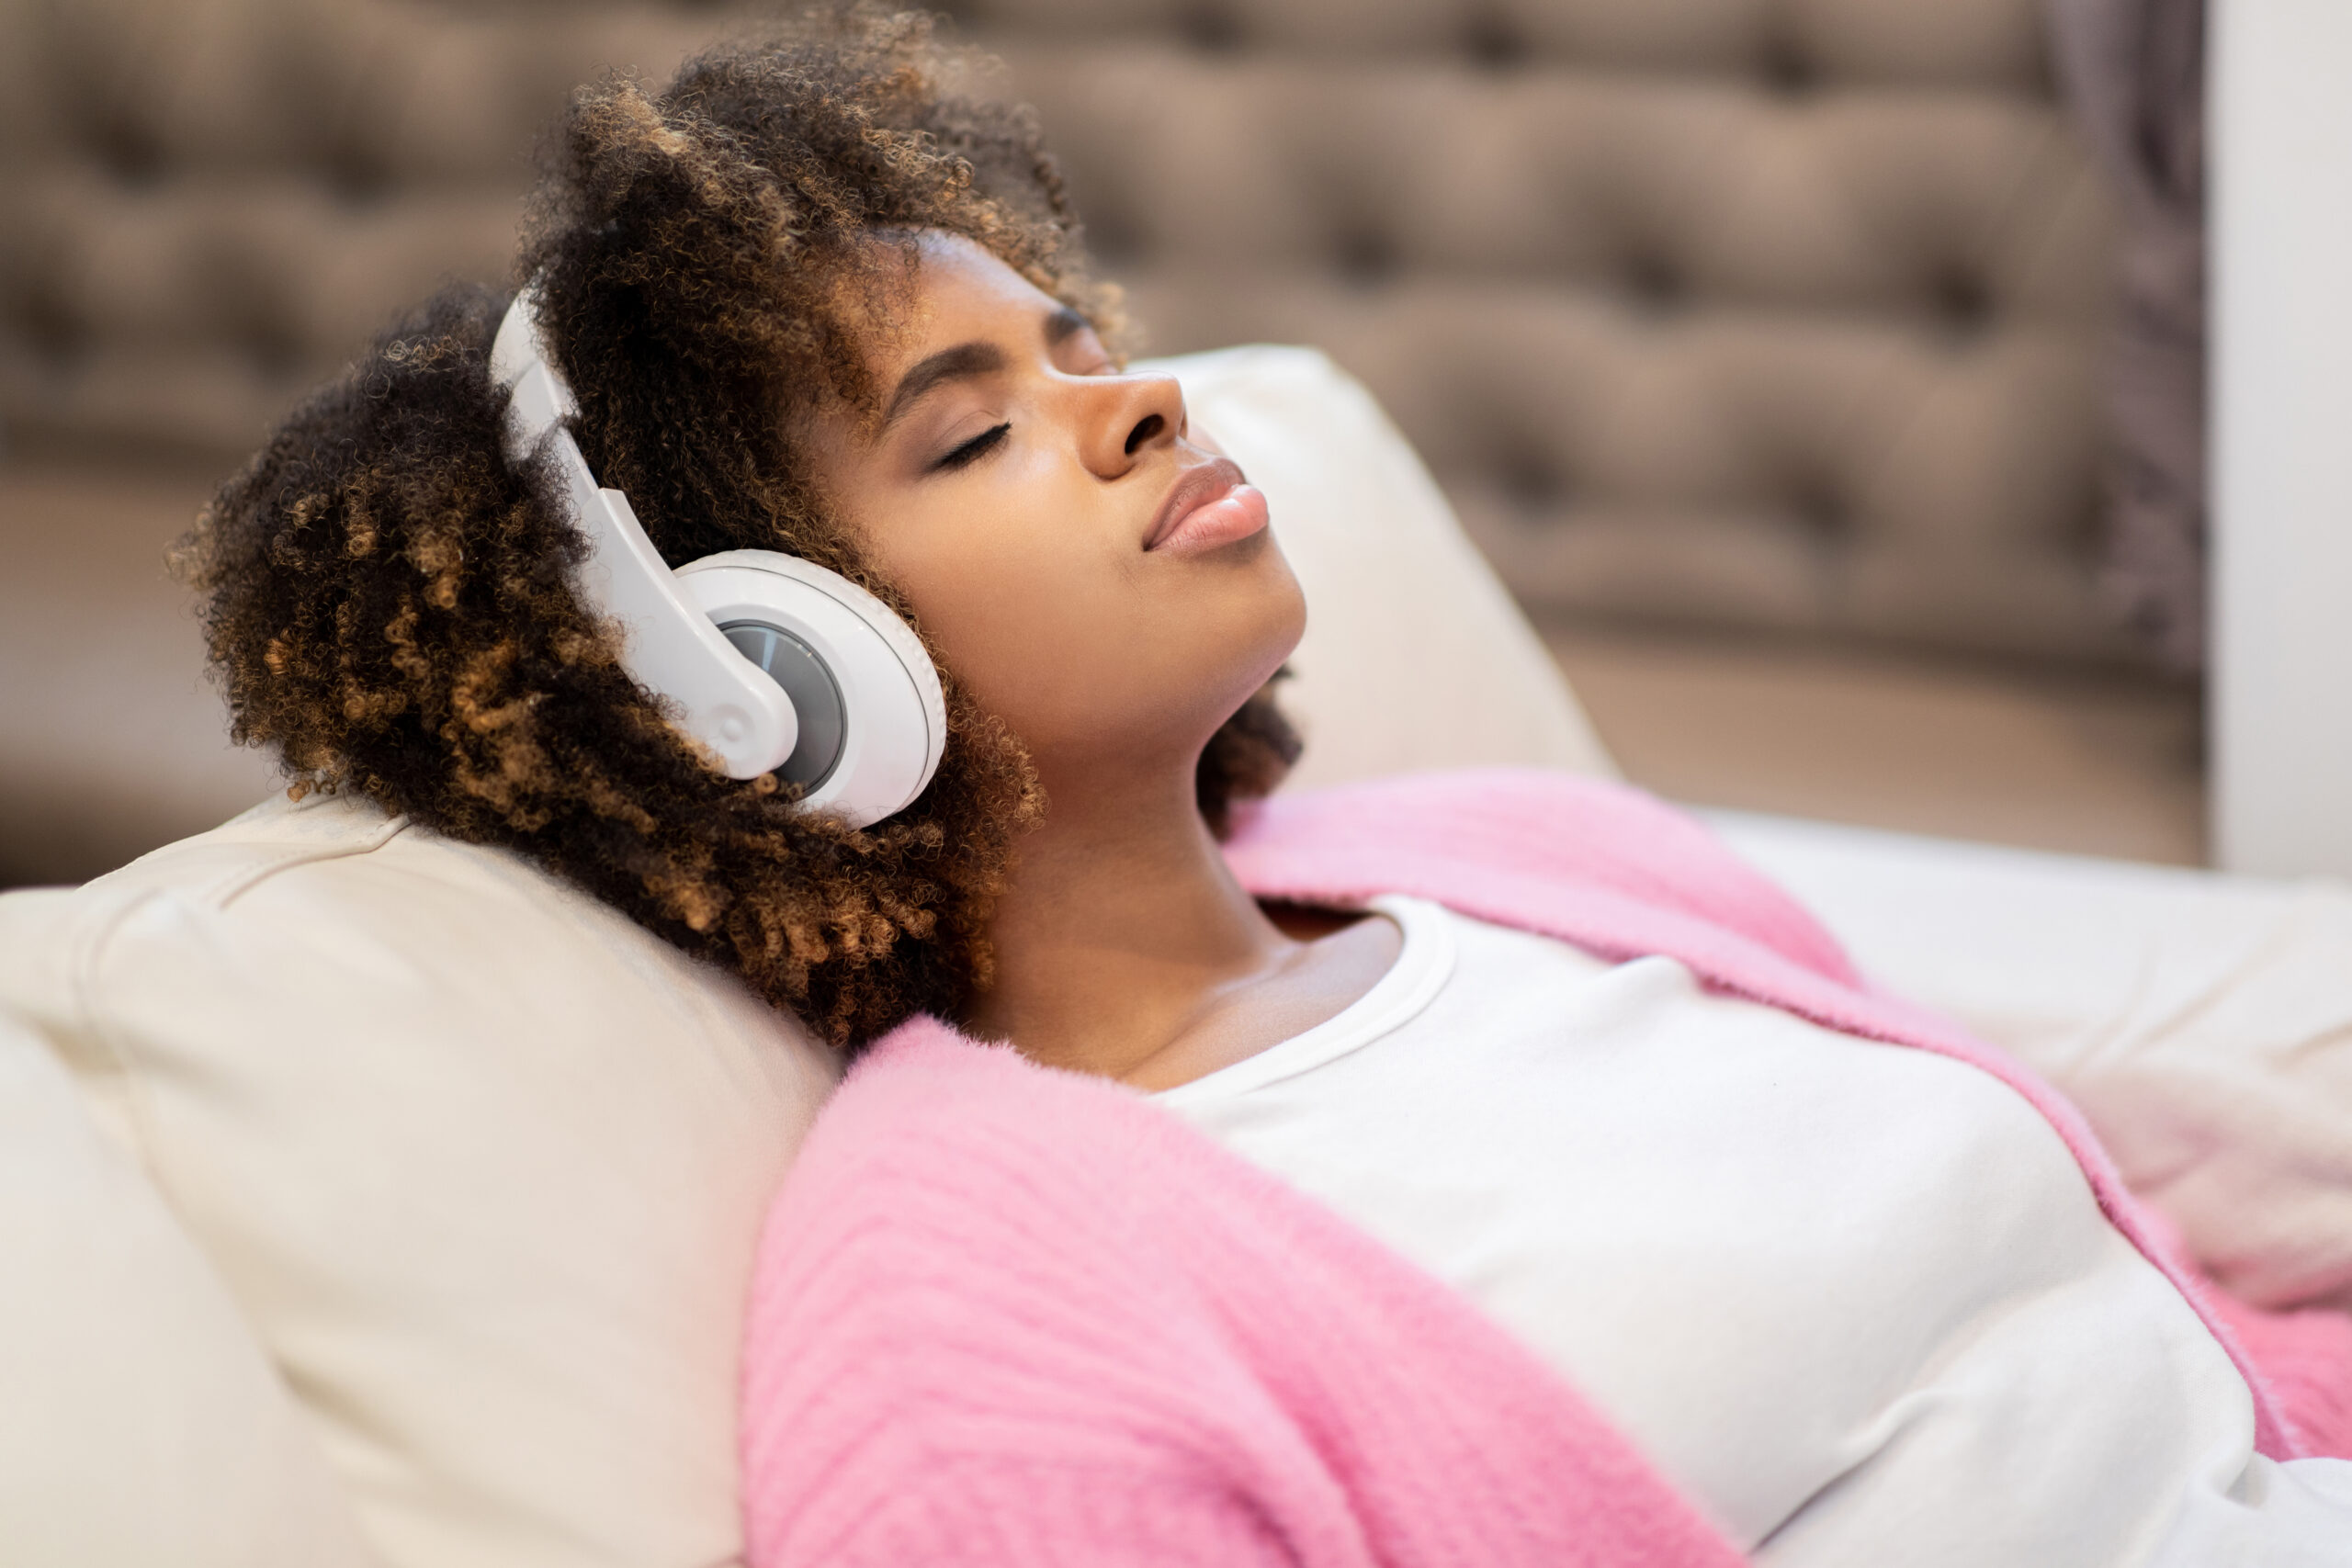 Closeup of peaceful relaxed millennial black woman with bushy hair wearing comfy casual outfit chilling on couch with closed eyes at home, using wireless headphones, copy space